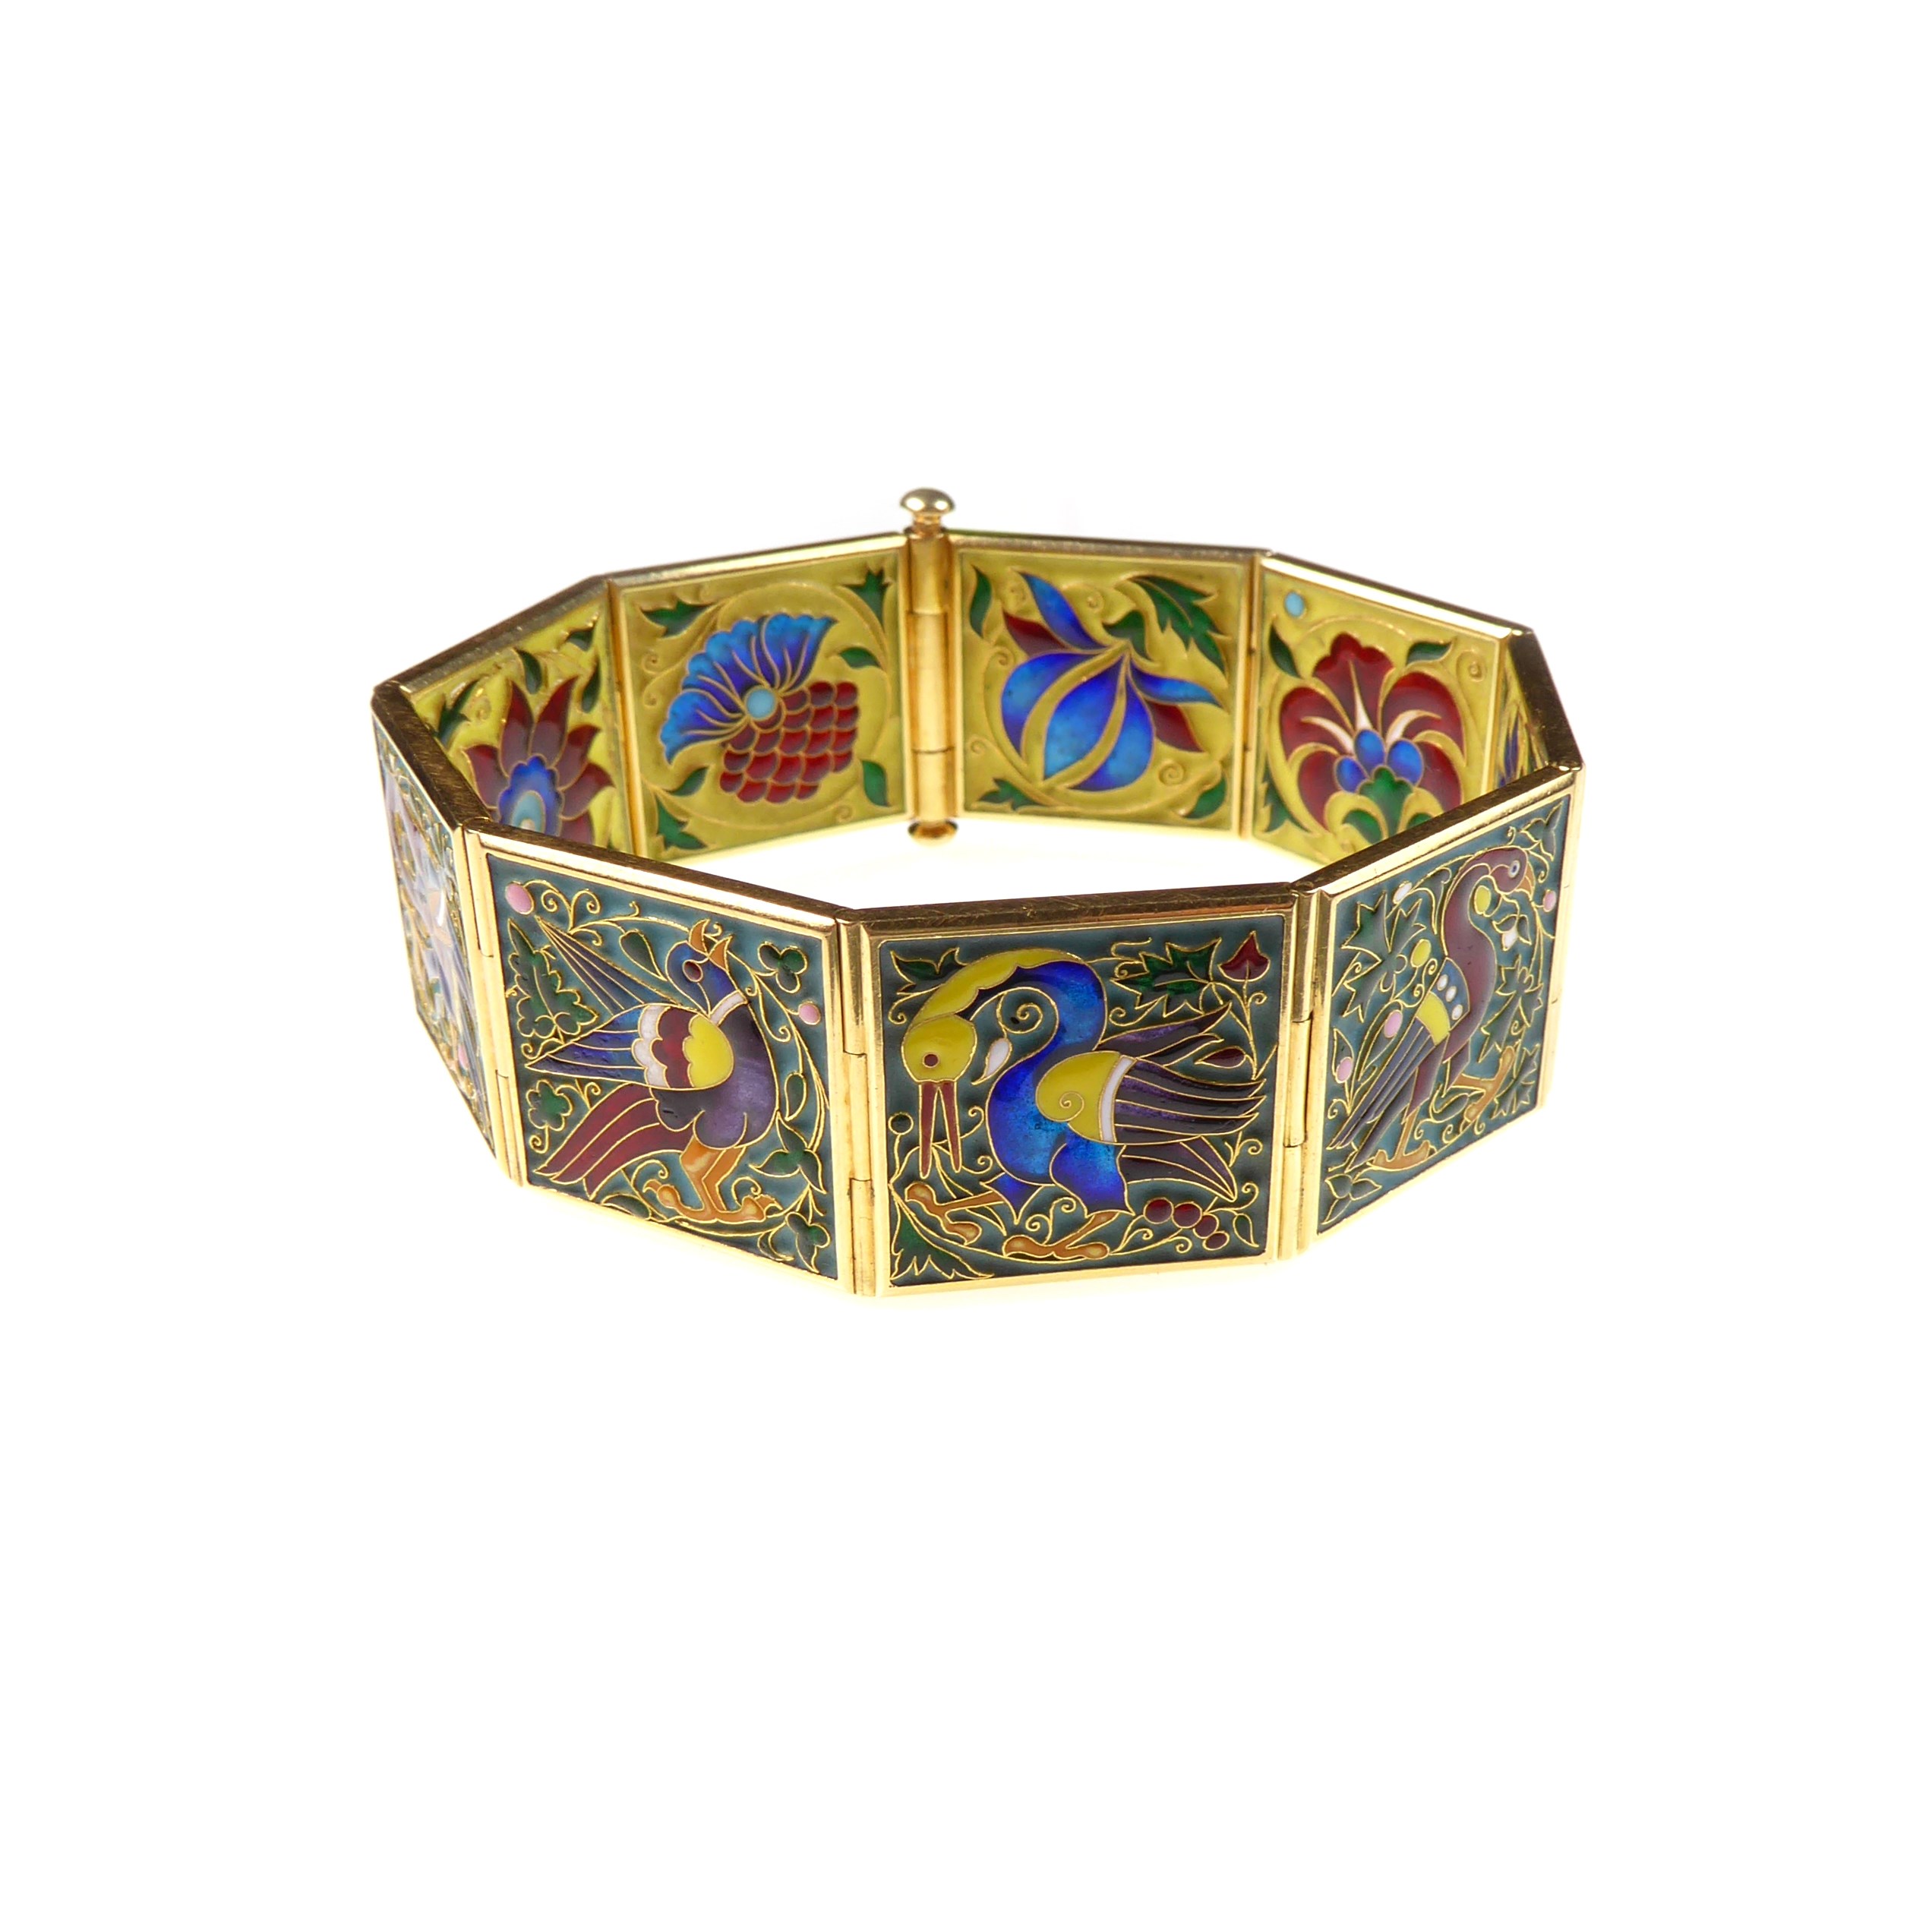 19th century enamel and gold articulated panel bracelet by Falize, Paris  c.1880, featuring birds to one side and flowers to the other, of Persian  and and Japanesque influence, | Object | S. J. Phillips